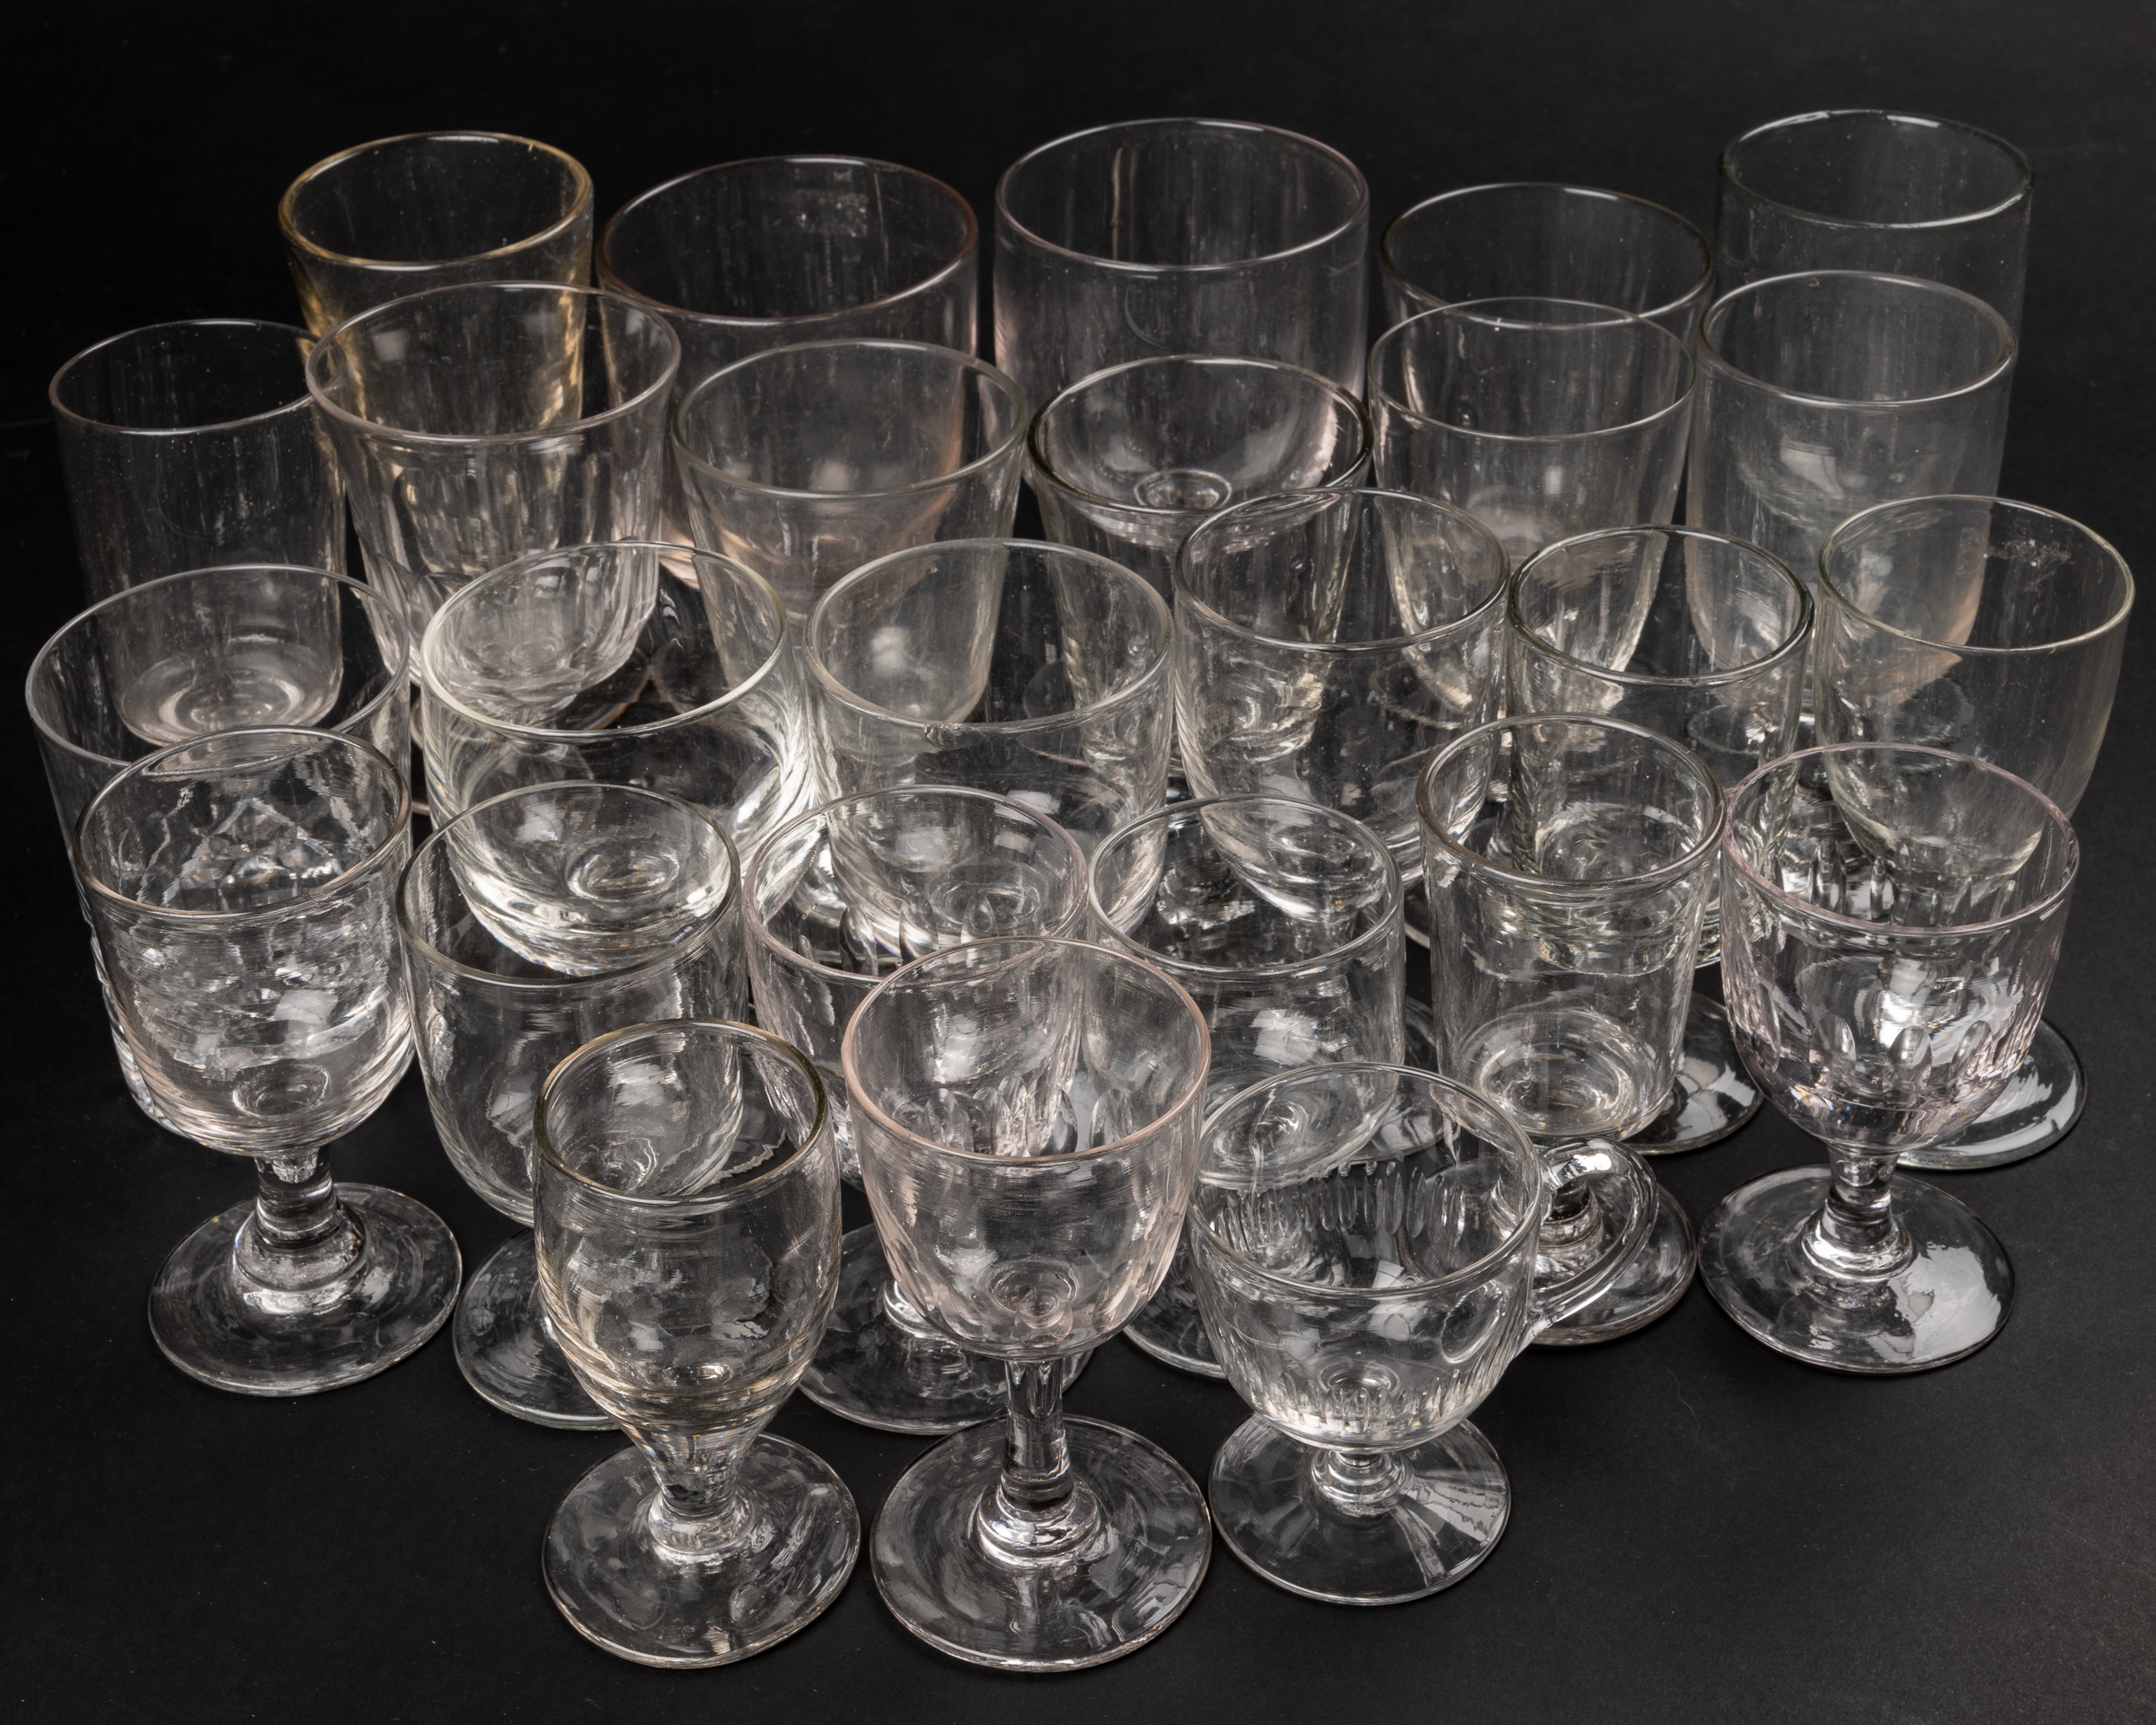 A collection of 19th century glassware